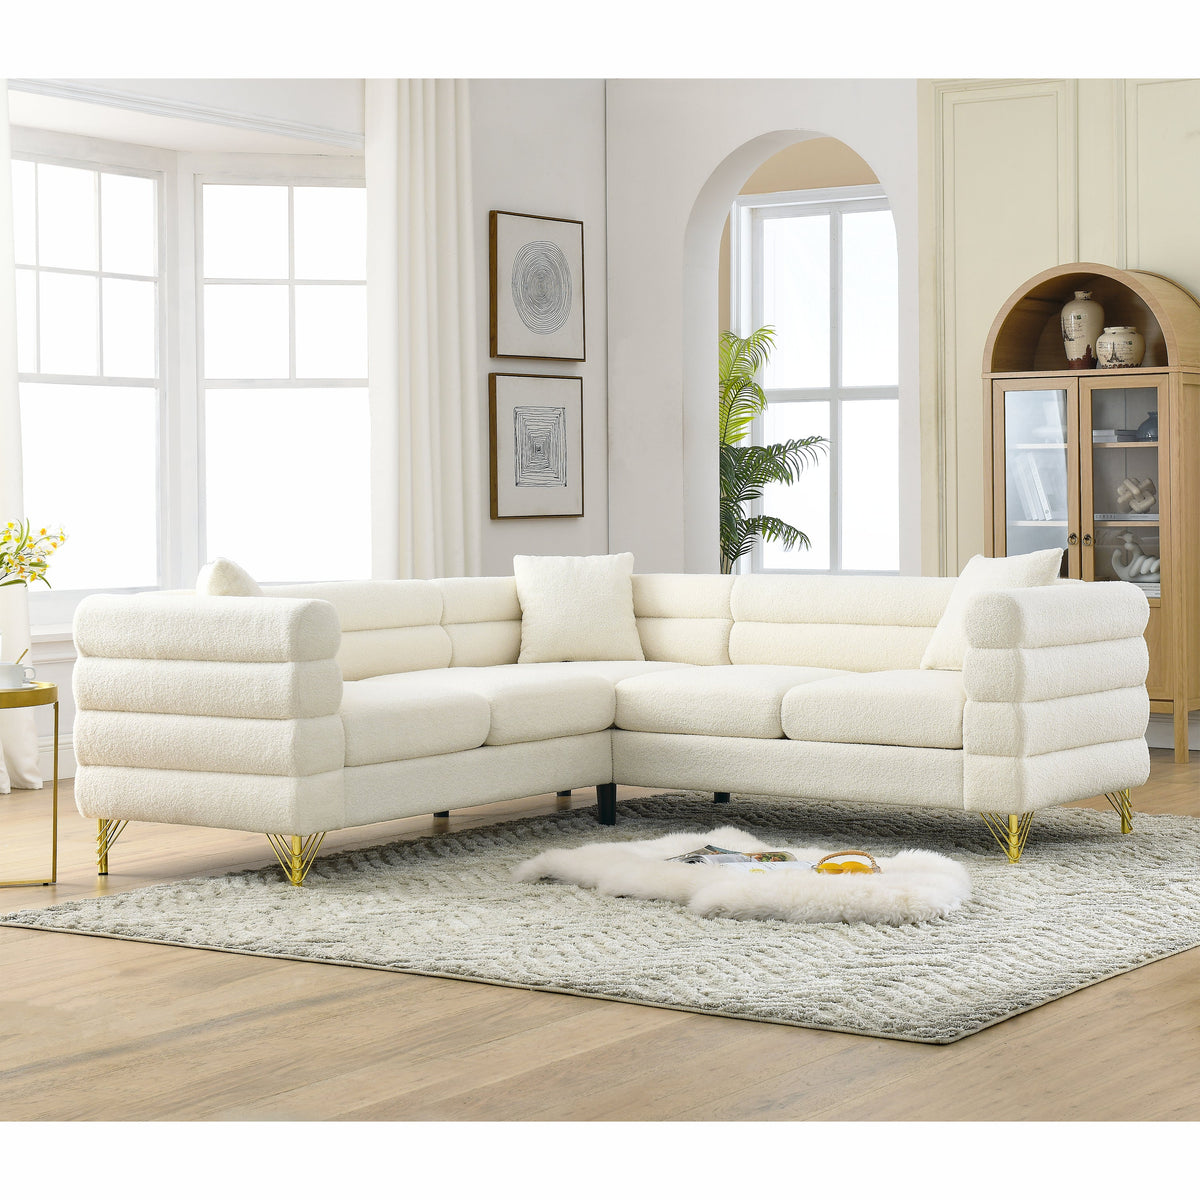 81.5-Inch Oversized Corner Sofa Covers, L-Shaped Sectional Couch,